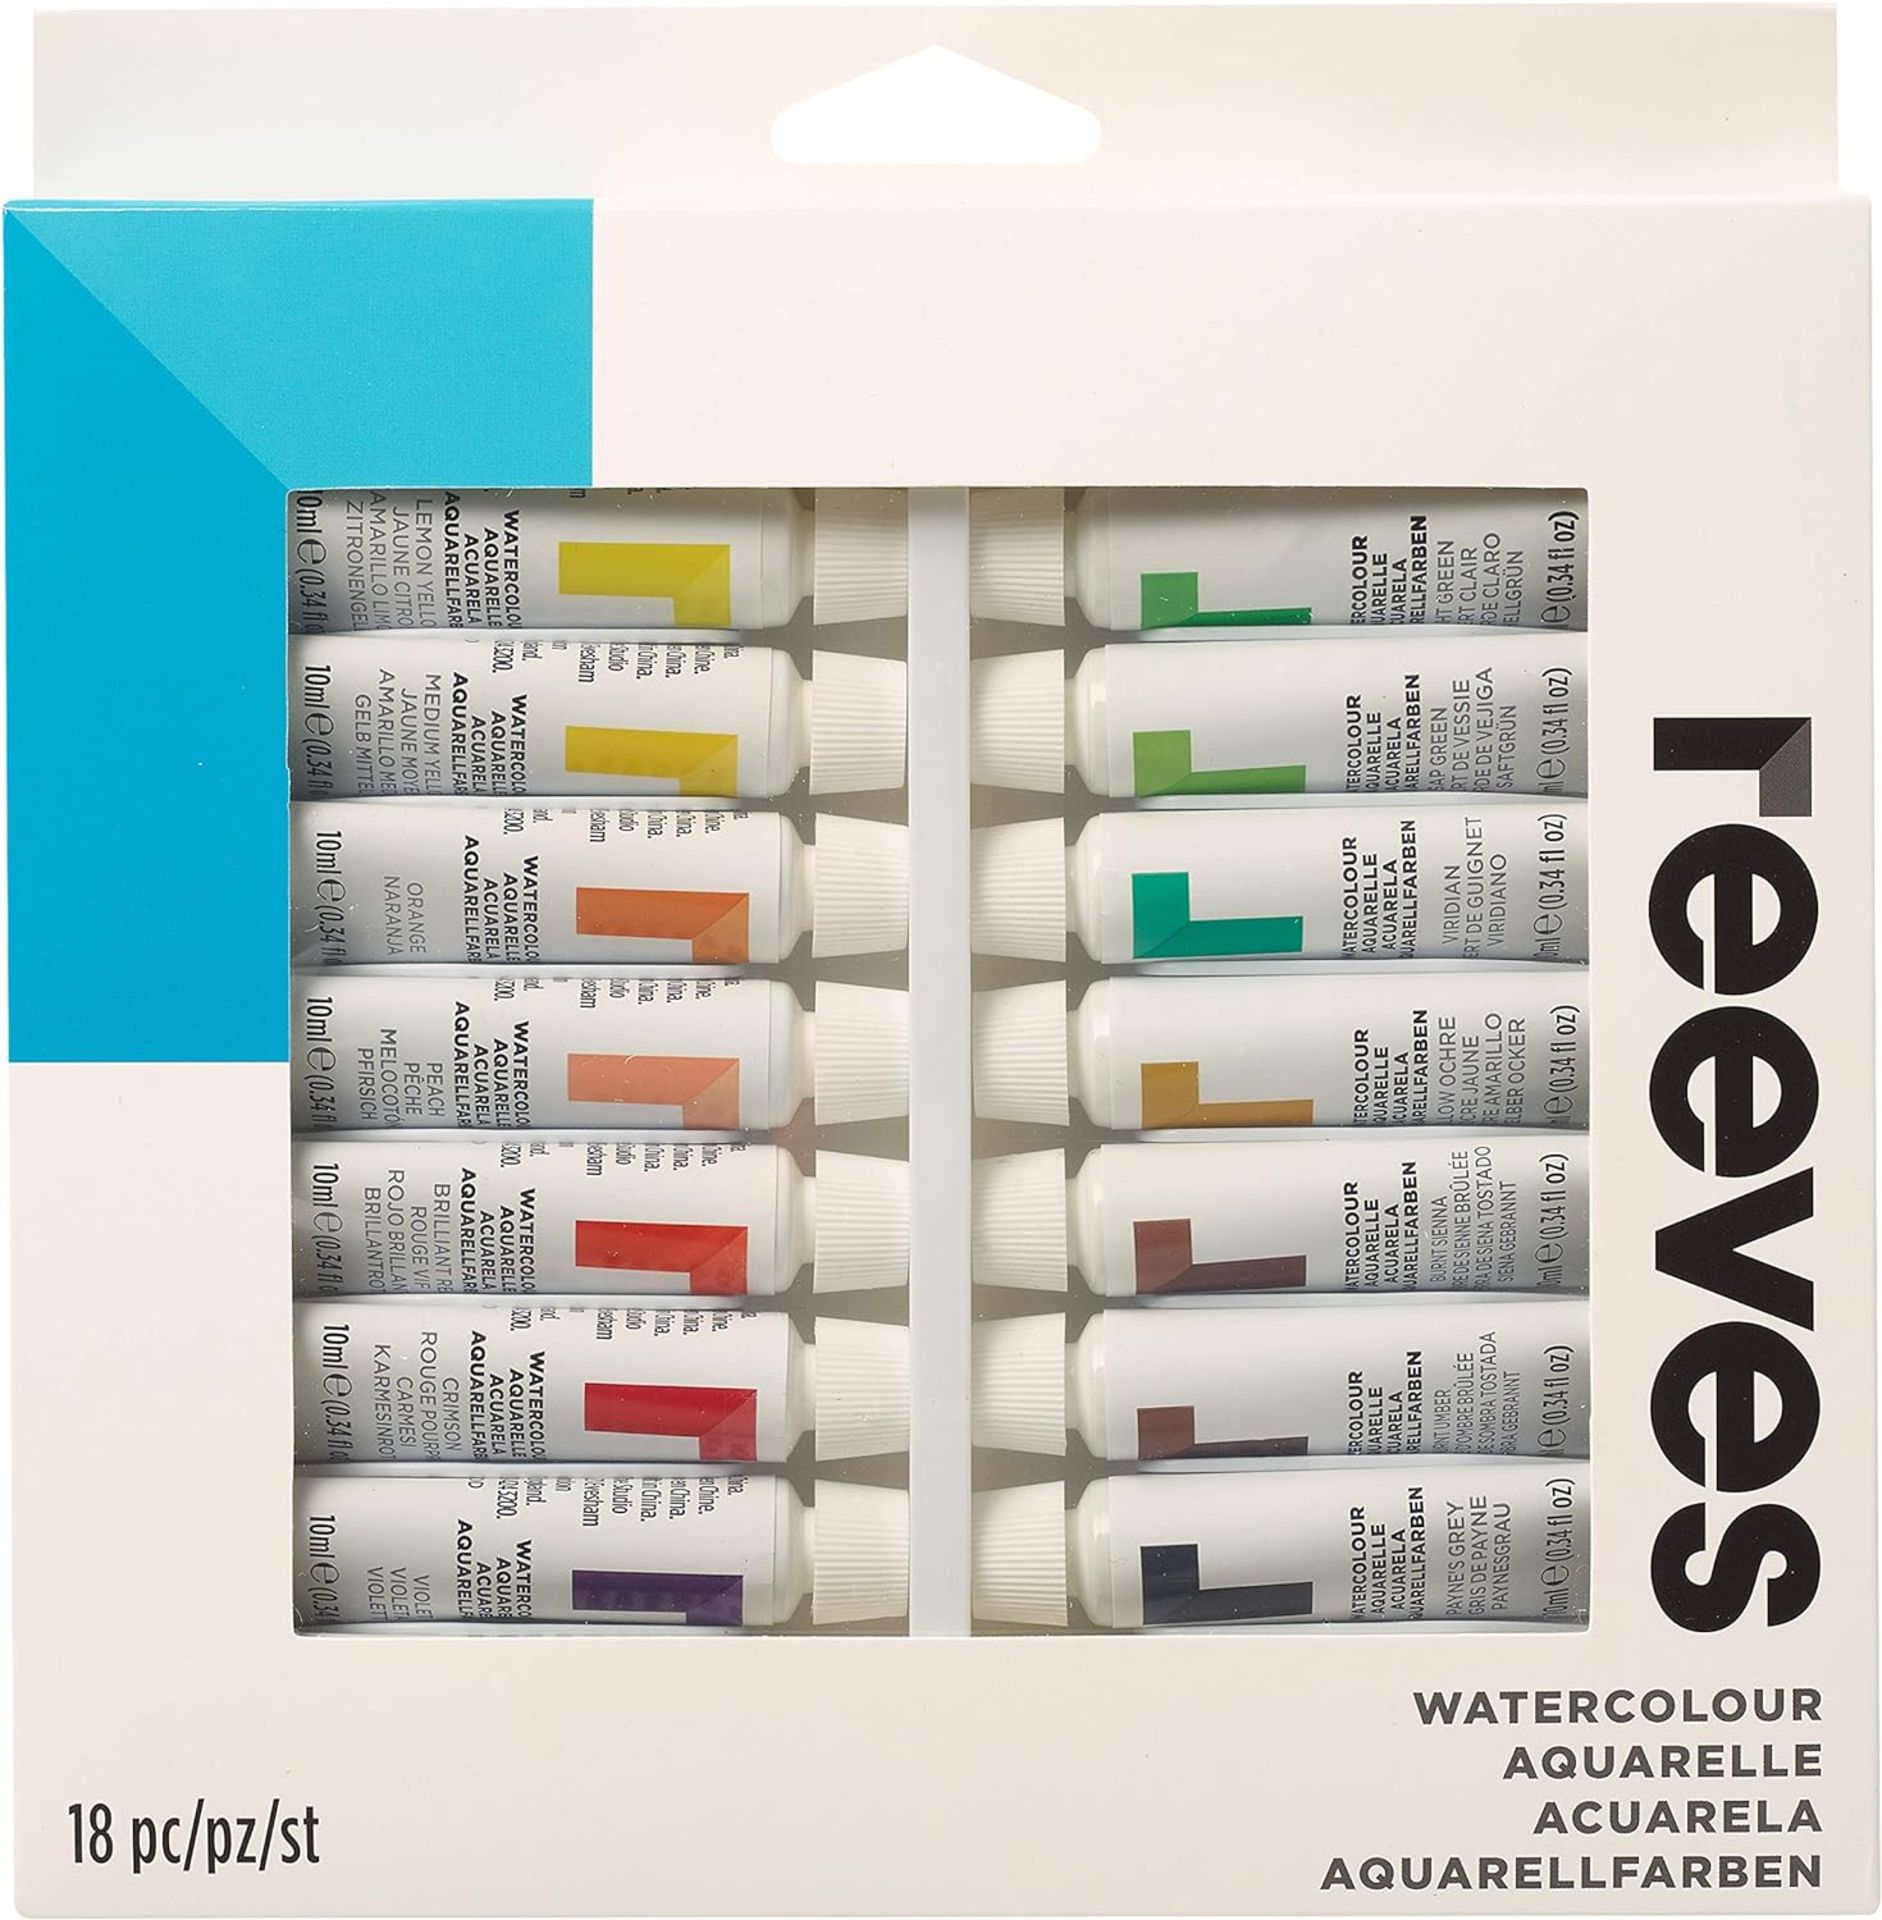 24x BRAND NEW REEVES Highly Pigmented Watercolour Paint Set - 18 x 12ml Pack. RRP £10.99 EACH. (